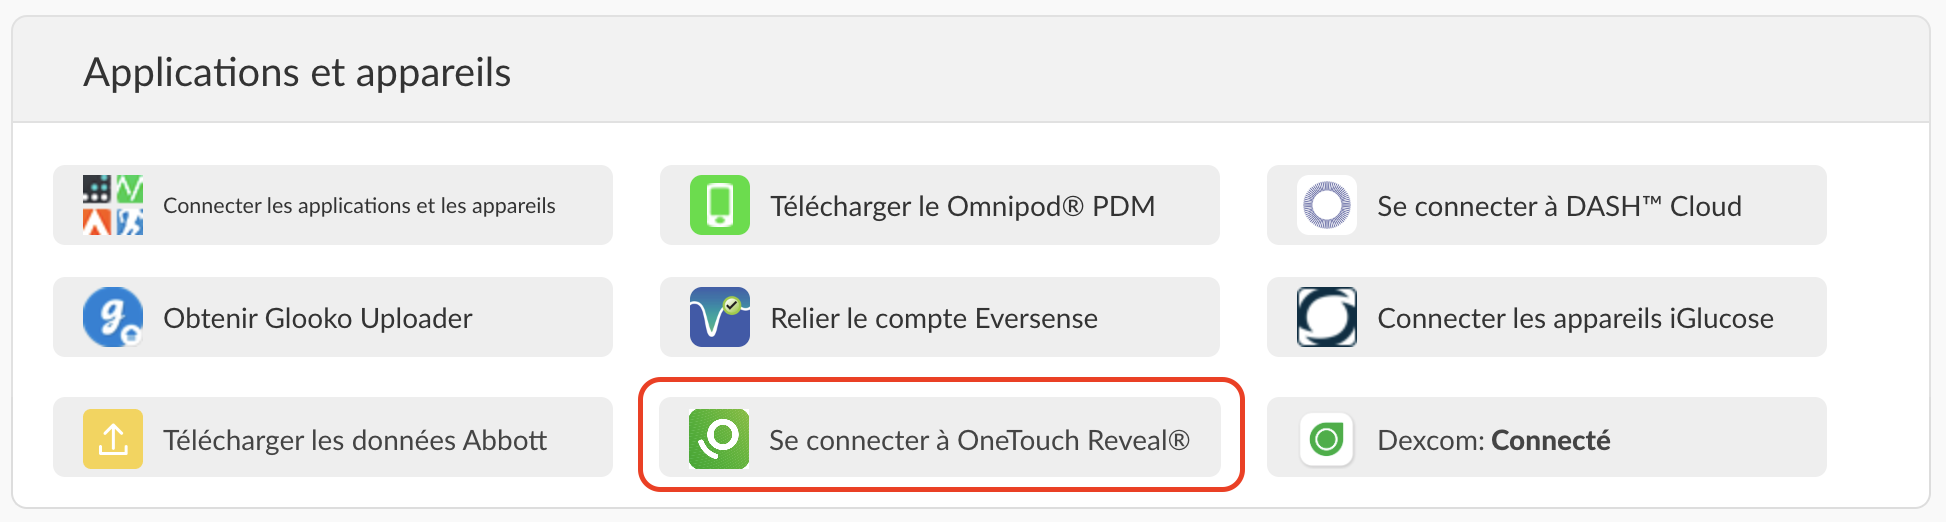 french-web-connectonetouch.png